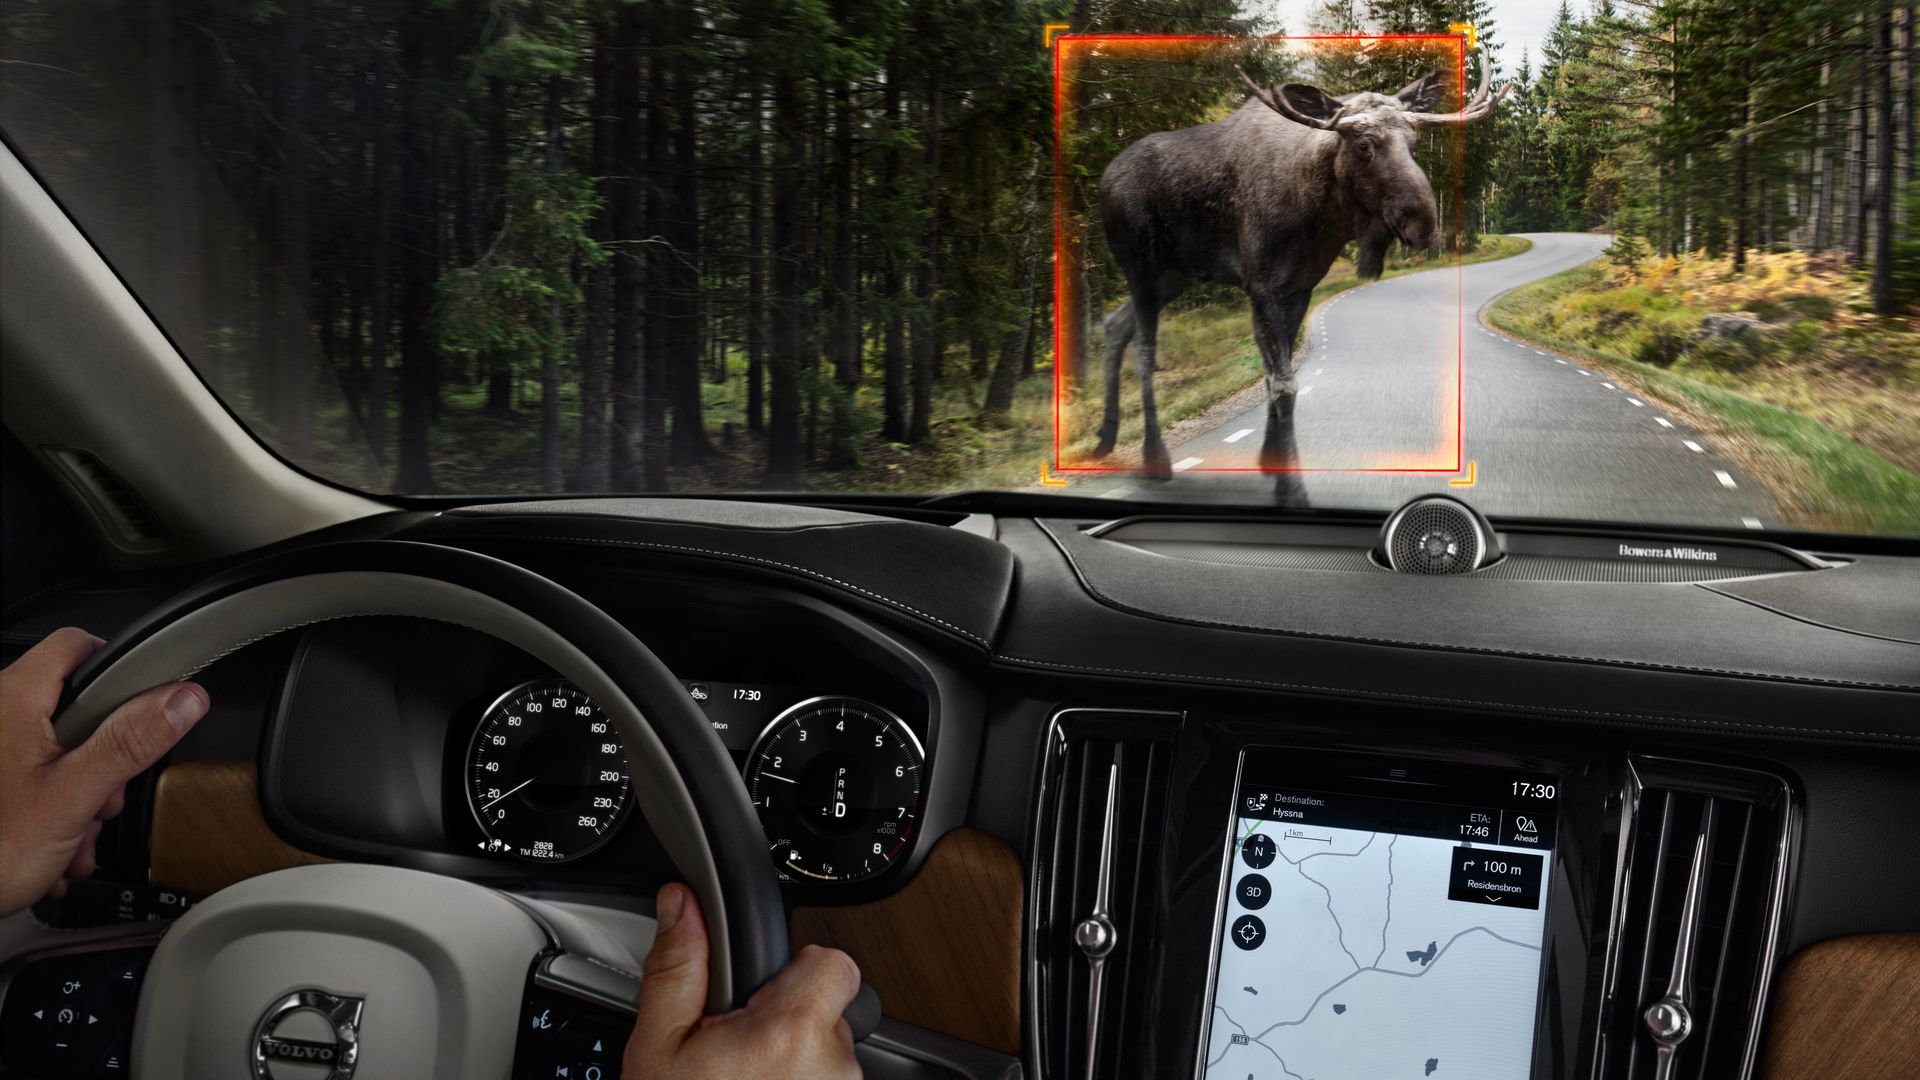 Image of a Volvo car's safety technology recognizing a moose on the road